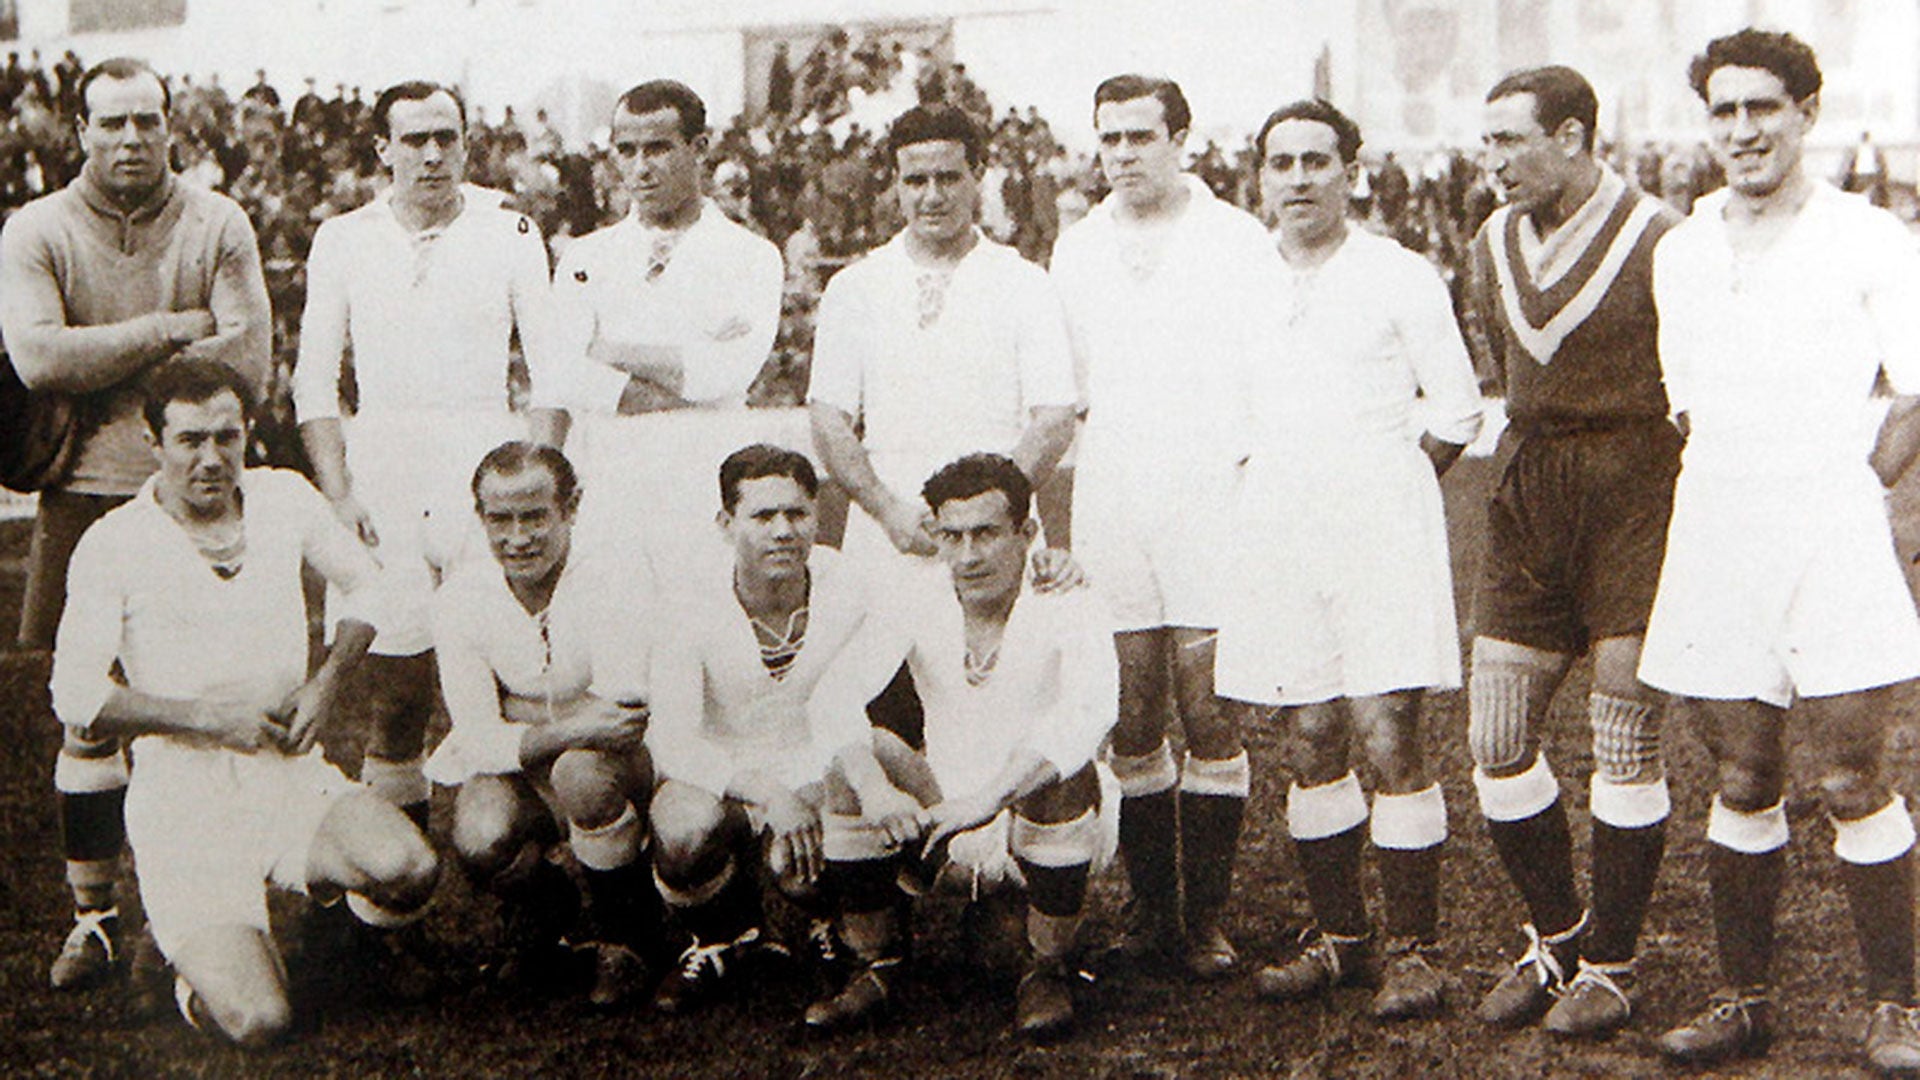 Today marks 91 years since the 2nd LaLiga title